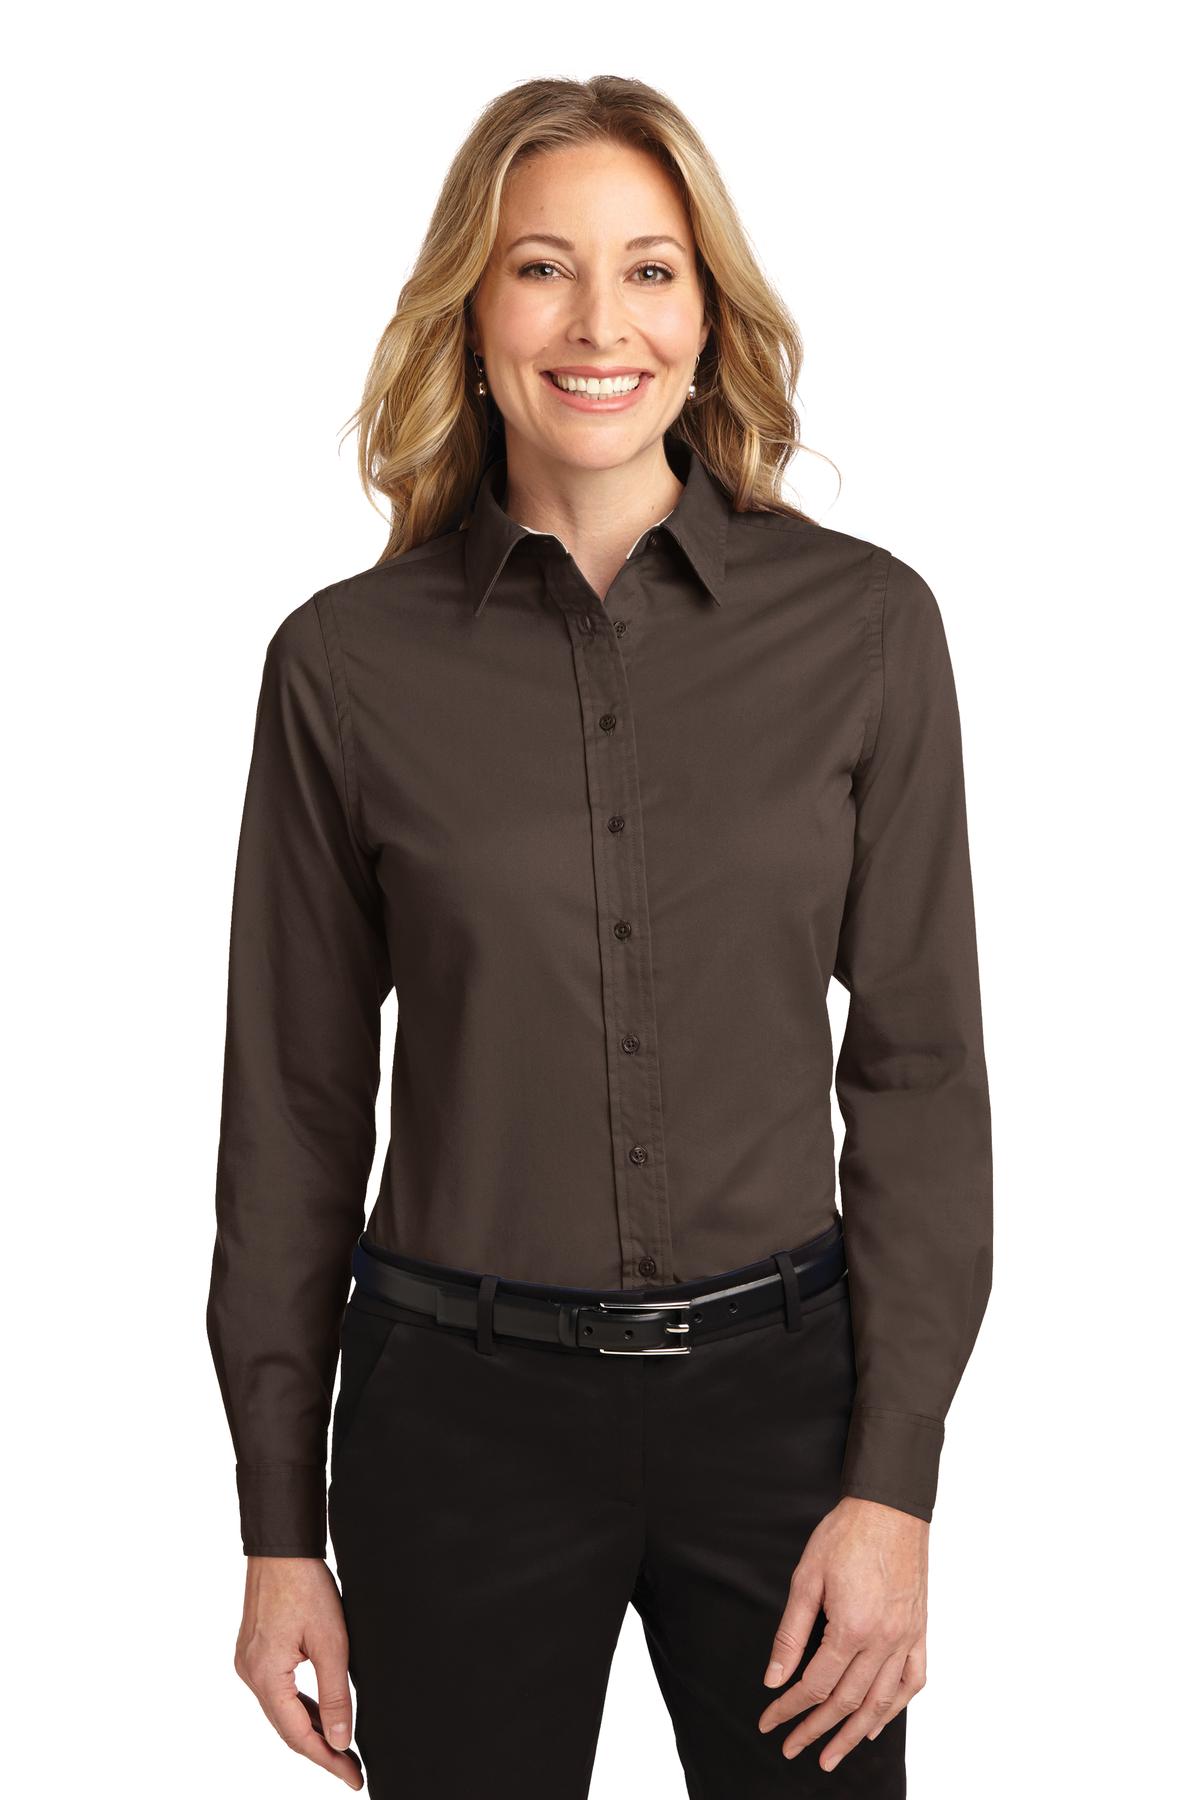 Port Authority ® Ladies Long Sleeve Easy Care Shirt. L608 - image 1 of 6